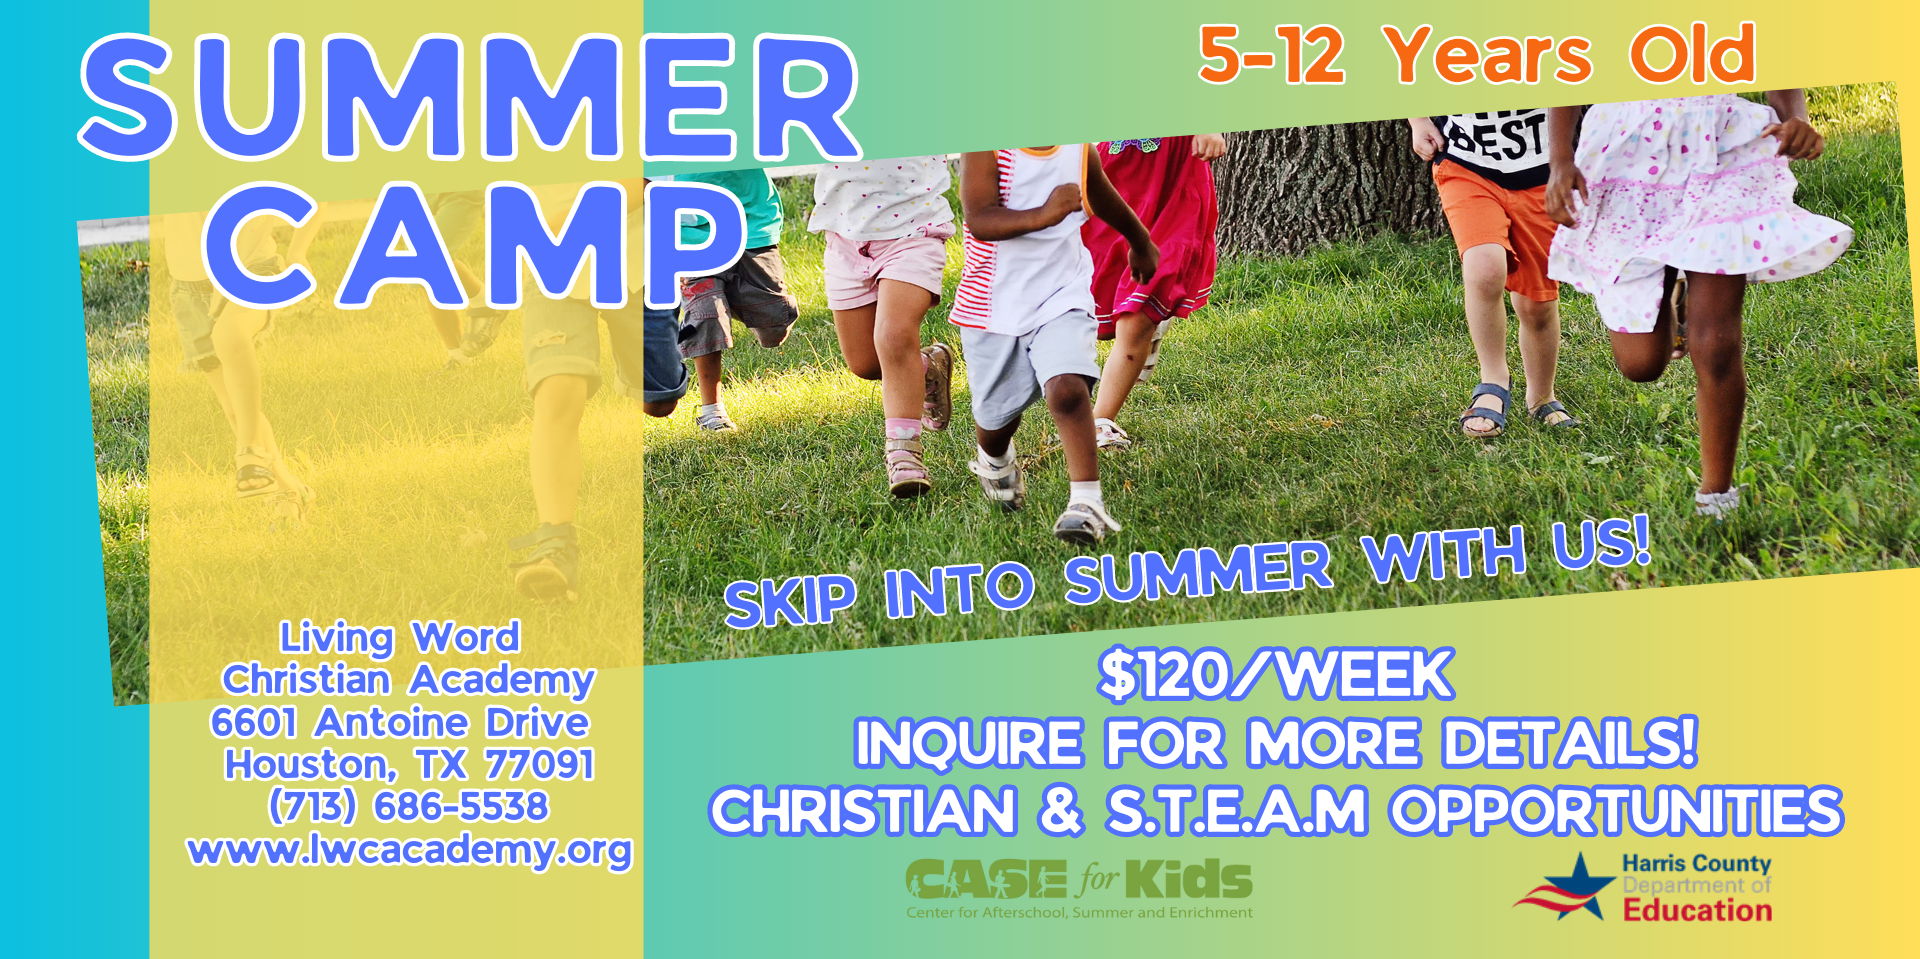 Living Word Christian Academy Summer Camp Special promotional image